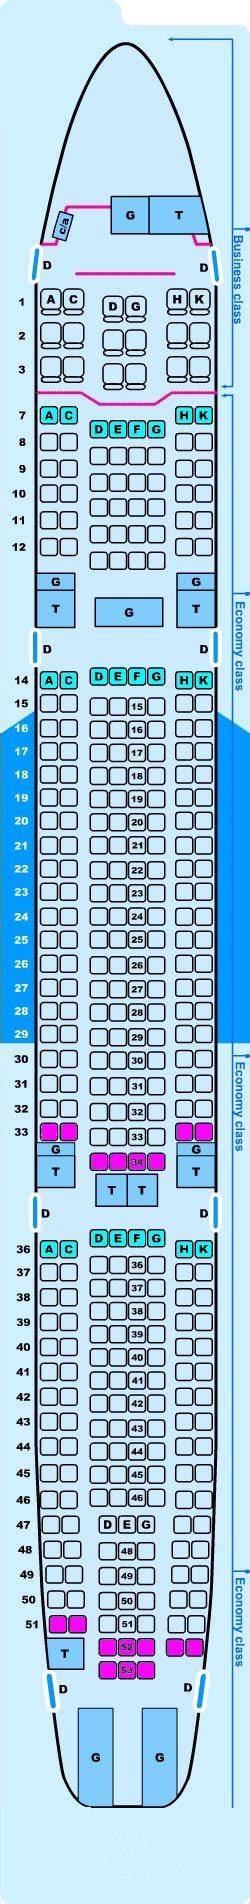 Airbus a330-300 seat chart. Overview. Hainan Airlines' Airbus A330-300 is flown in a two class configuration with 32 flat bed Busniess Class seats and 260 standard Economy Class seats. Business class features such amenities as plush silk pillows, slippers, and an onboard espresso machine. Hainan operates another version of the A333 that flies with just First and Business ... 